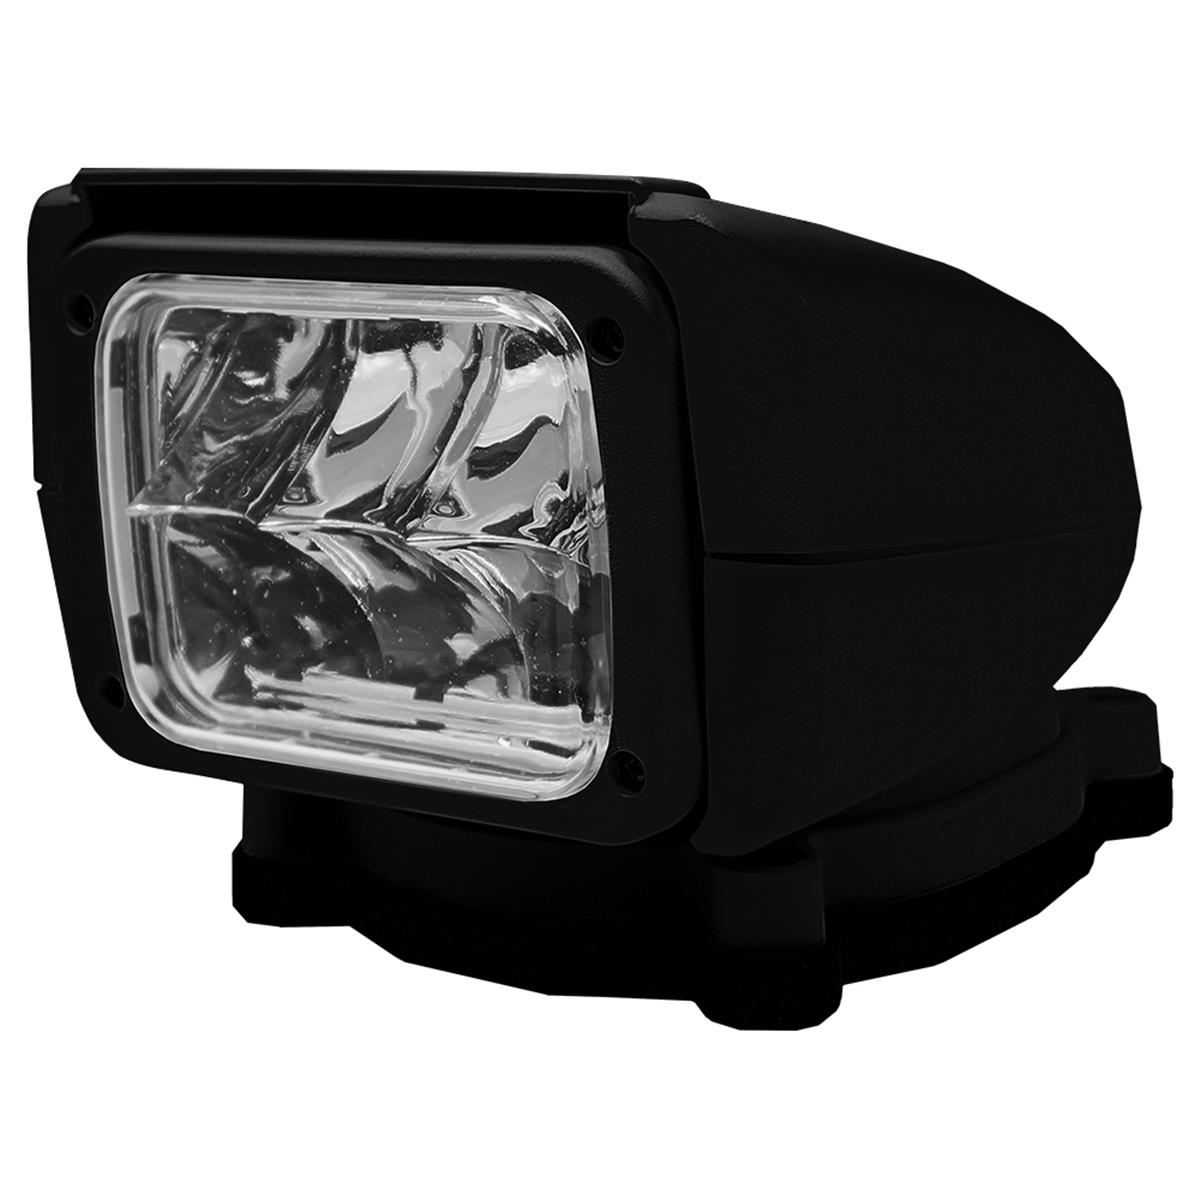 1957 Rcl-85 Black Led Searchlight With Wireless Remote Control - 12-24v